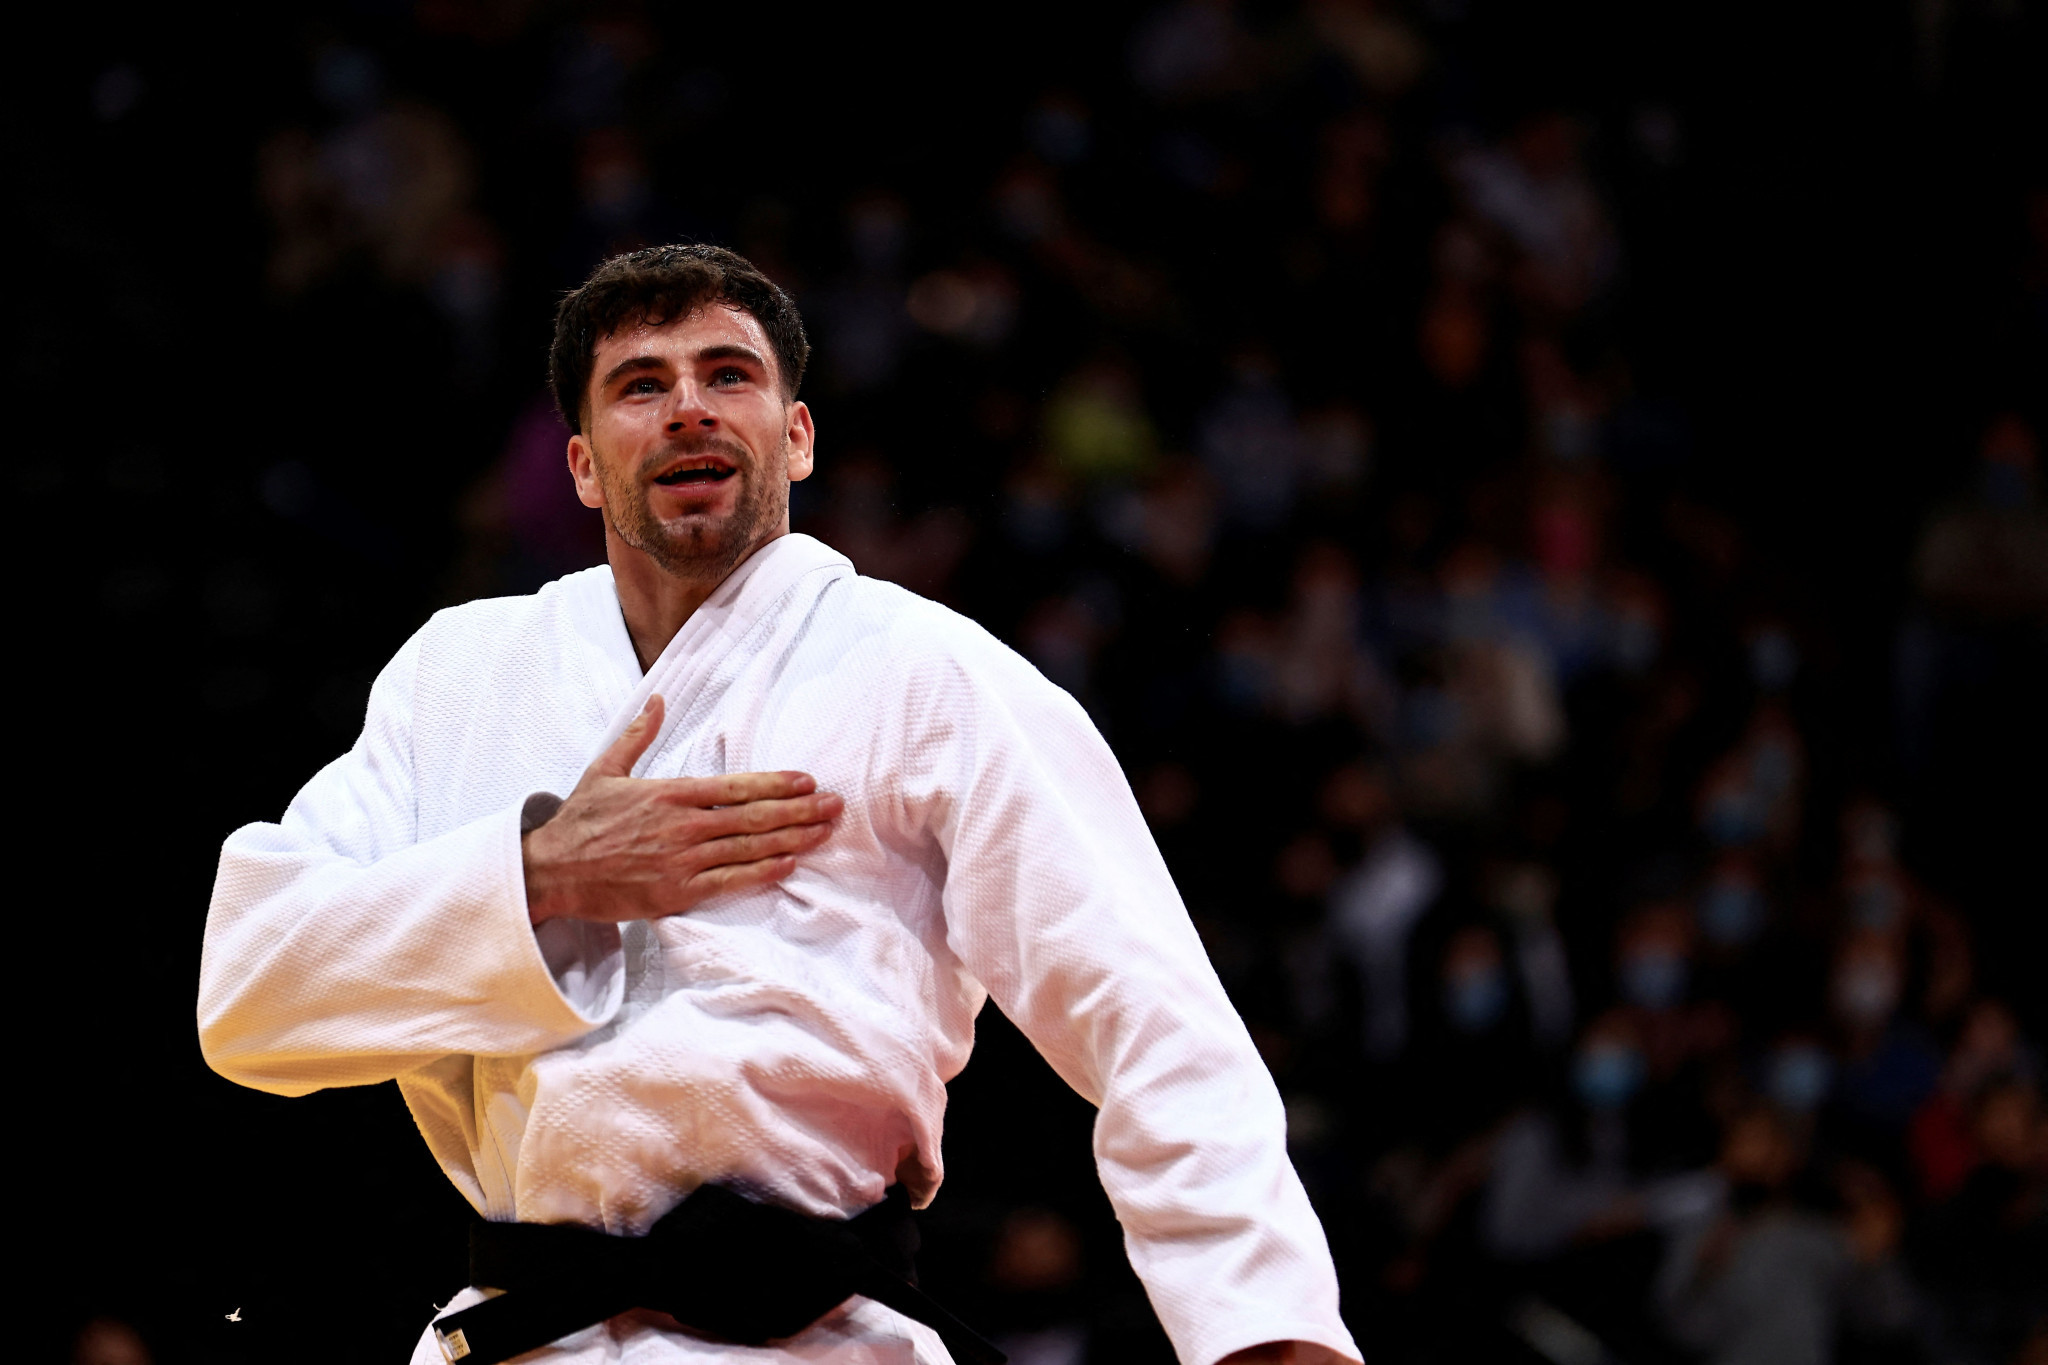 Ugo Legrand will have to usurp Benjamin Axus, pictured, as France's men's under-73kg number one to compete at Paris 2024 ©Getty Images